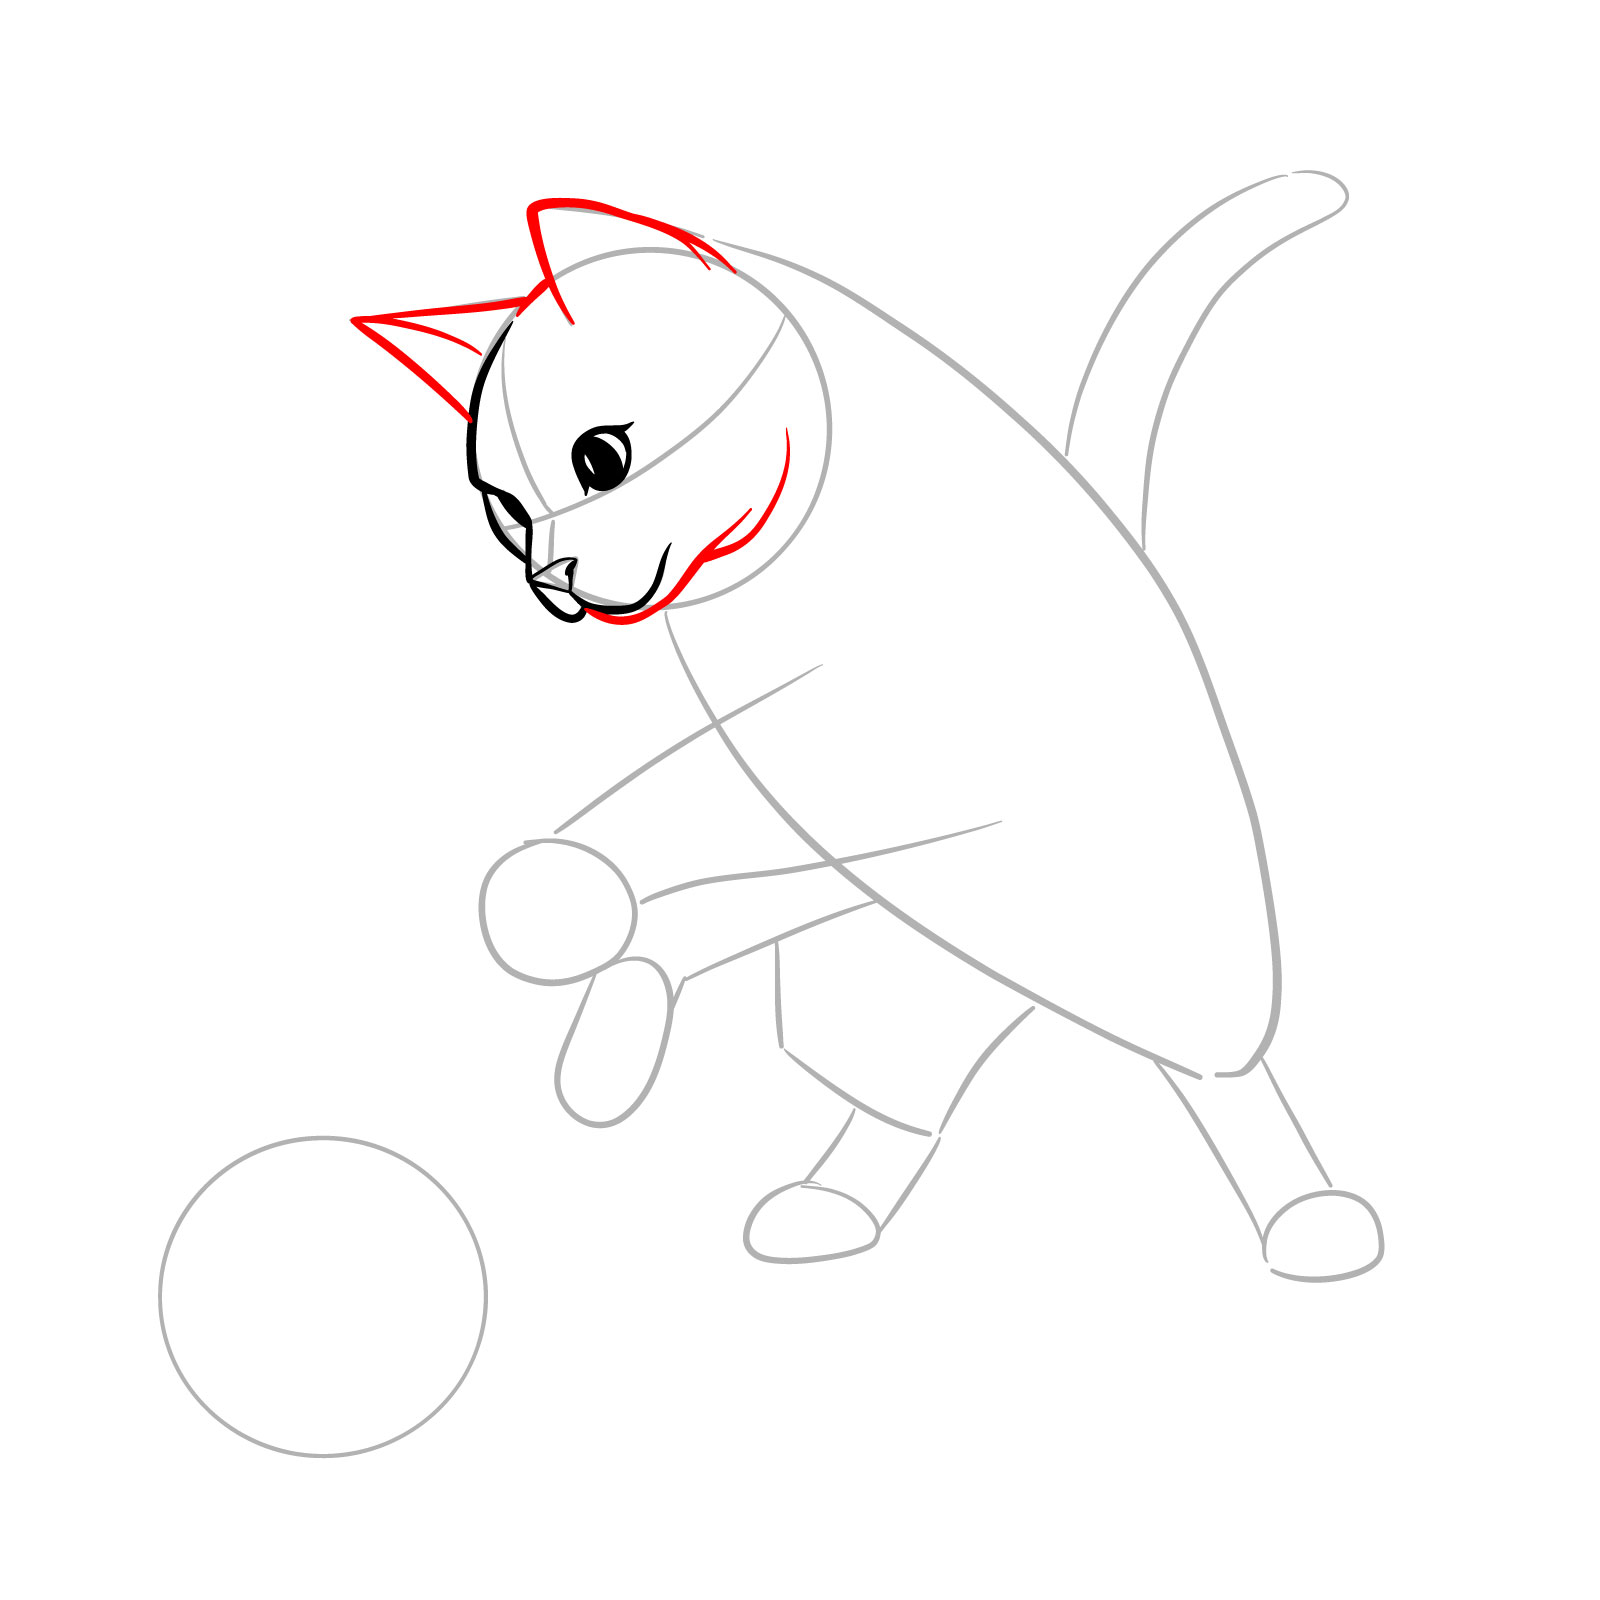 Illustration of a playful cat with added chin, bottom of the head, and ears - step 06